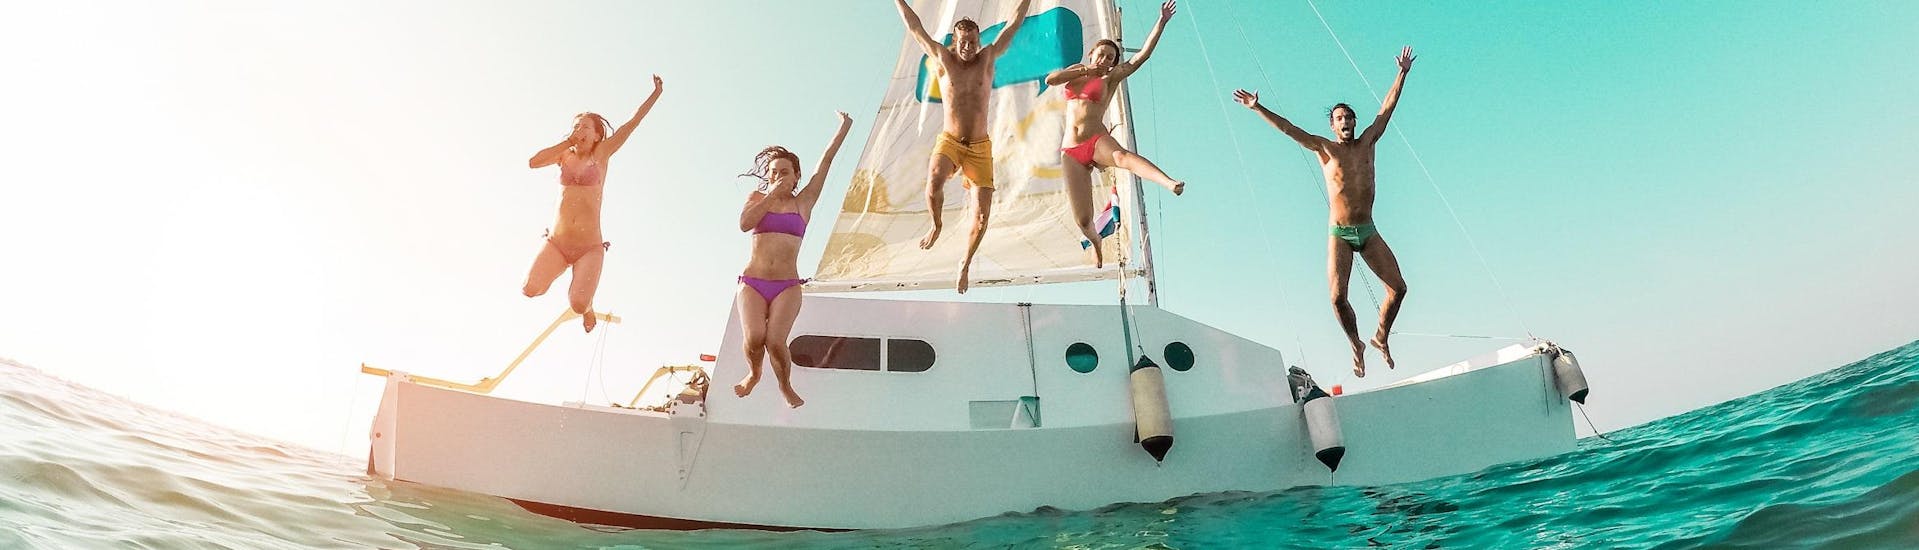 A group of friends is jumping into the sea during their boat trip in Ibiza.